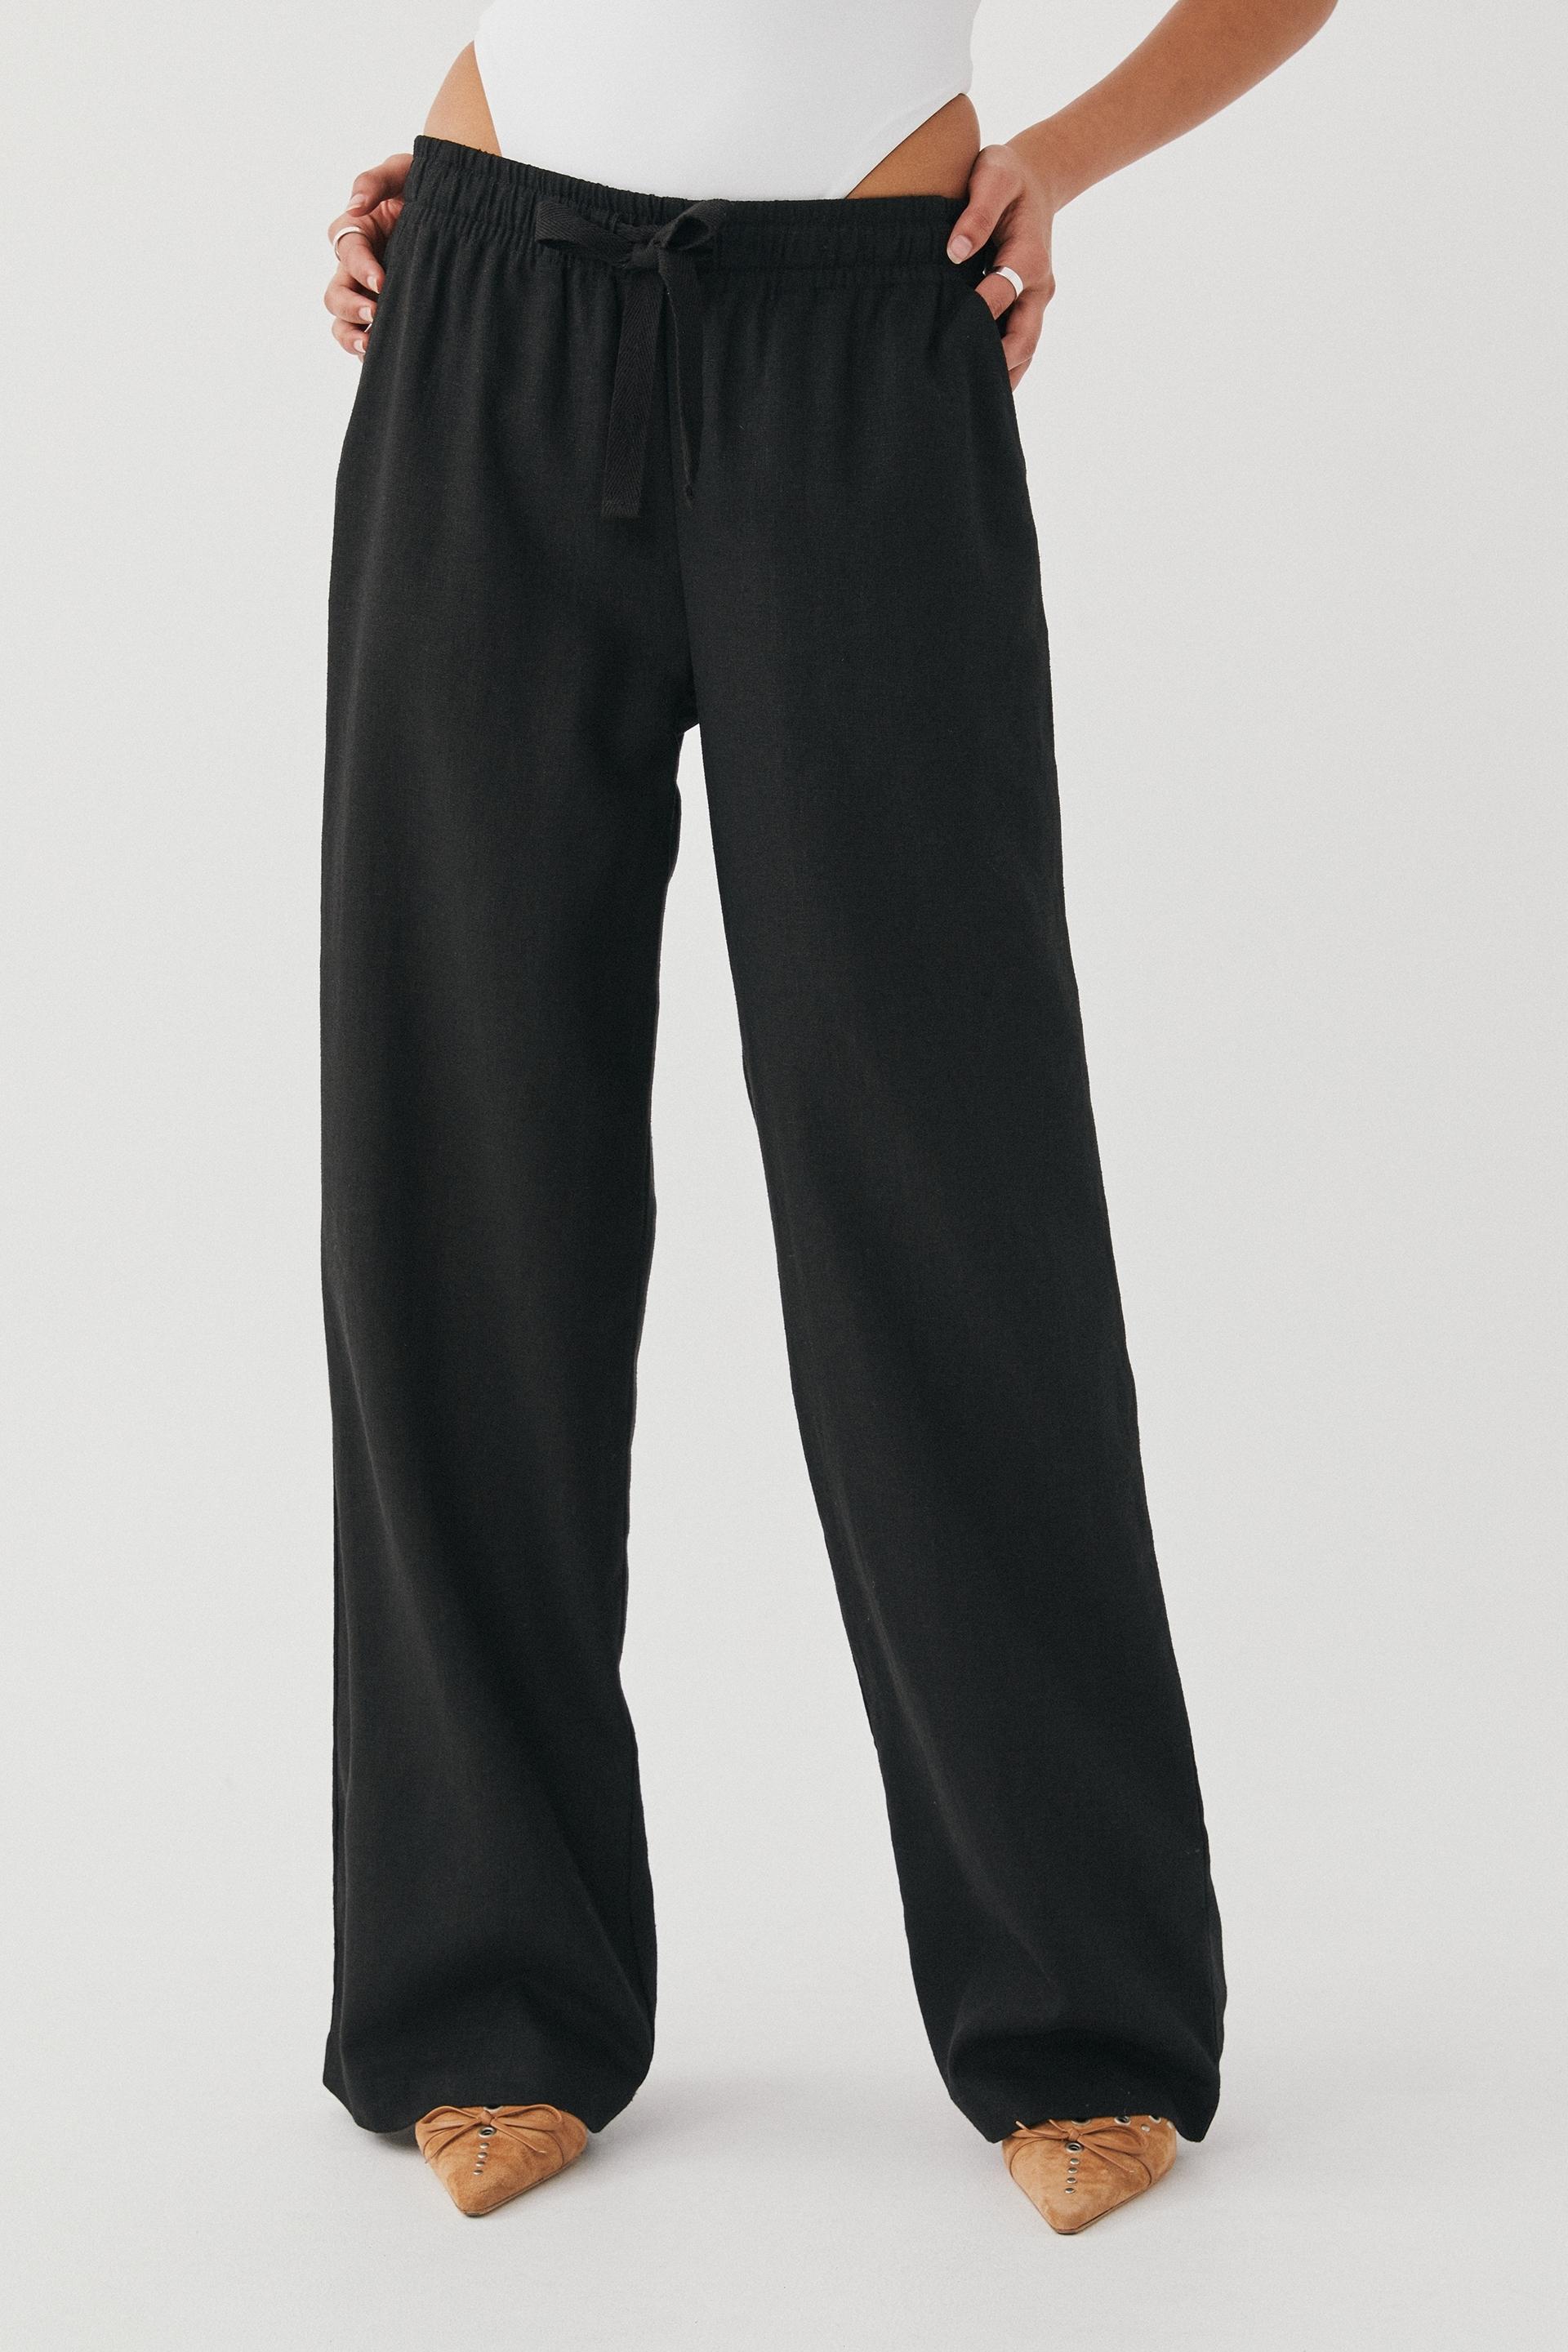 Maddy pull on wide leg pant - black Supré Trousers | Superbalist.com